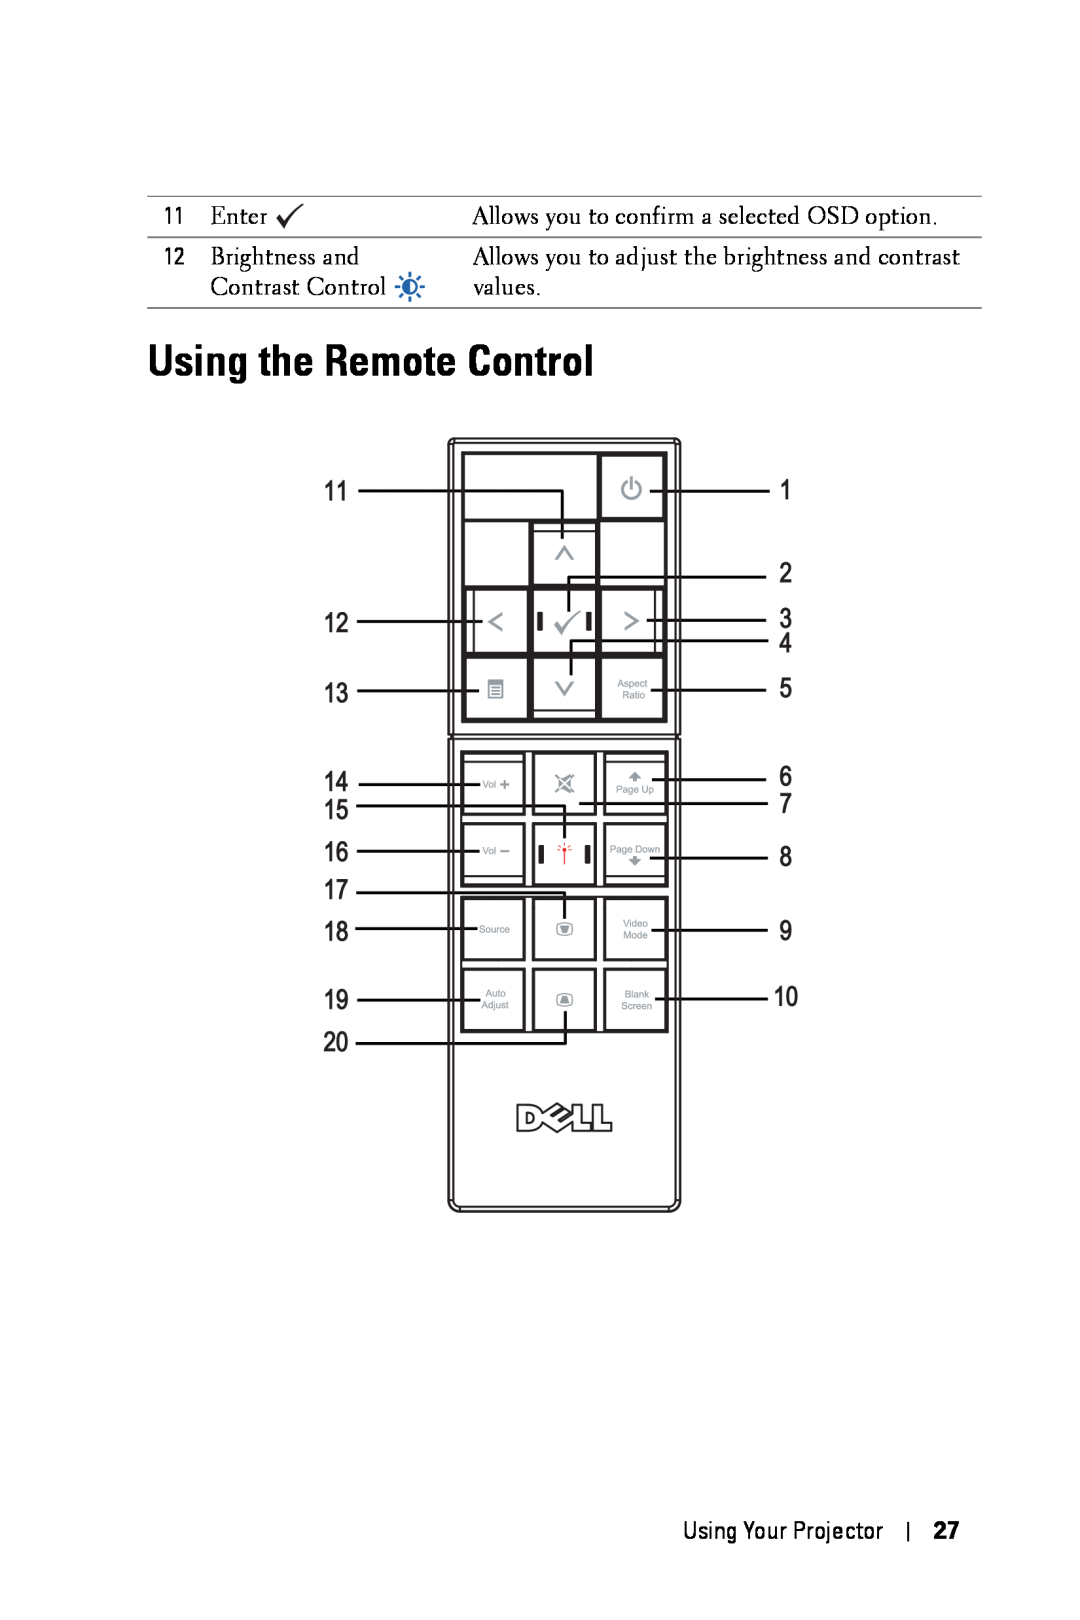 Dell 7609WU Using the Remote Control, Enter, Allows you to confirm a selected OSD option, Brightness and, Contrast Control 